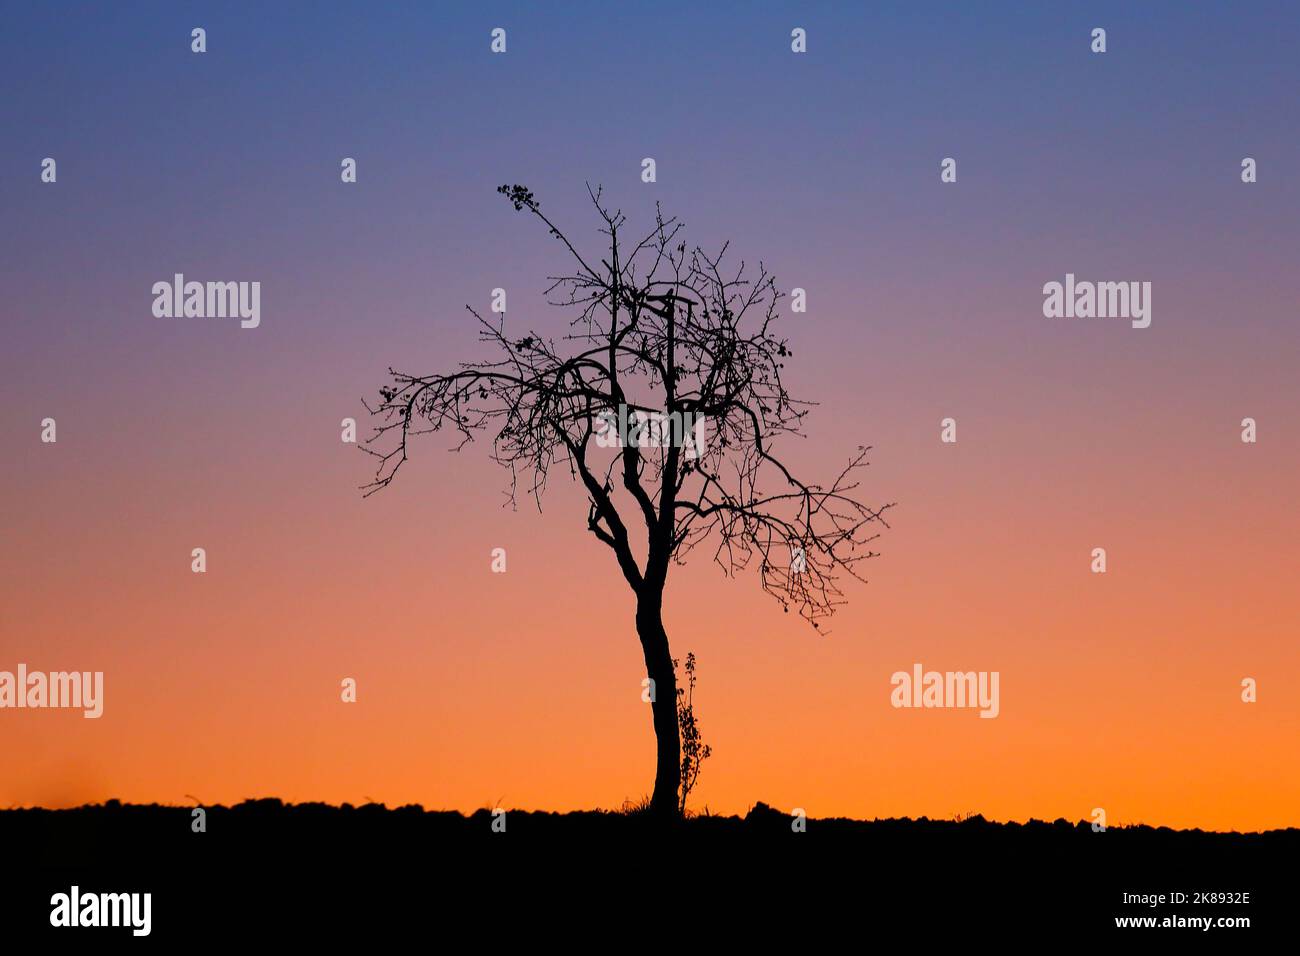 countryside landscape with tree backlight at sunset in the colorful sky Stock Photo